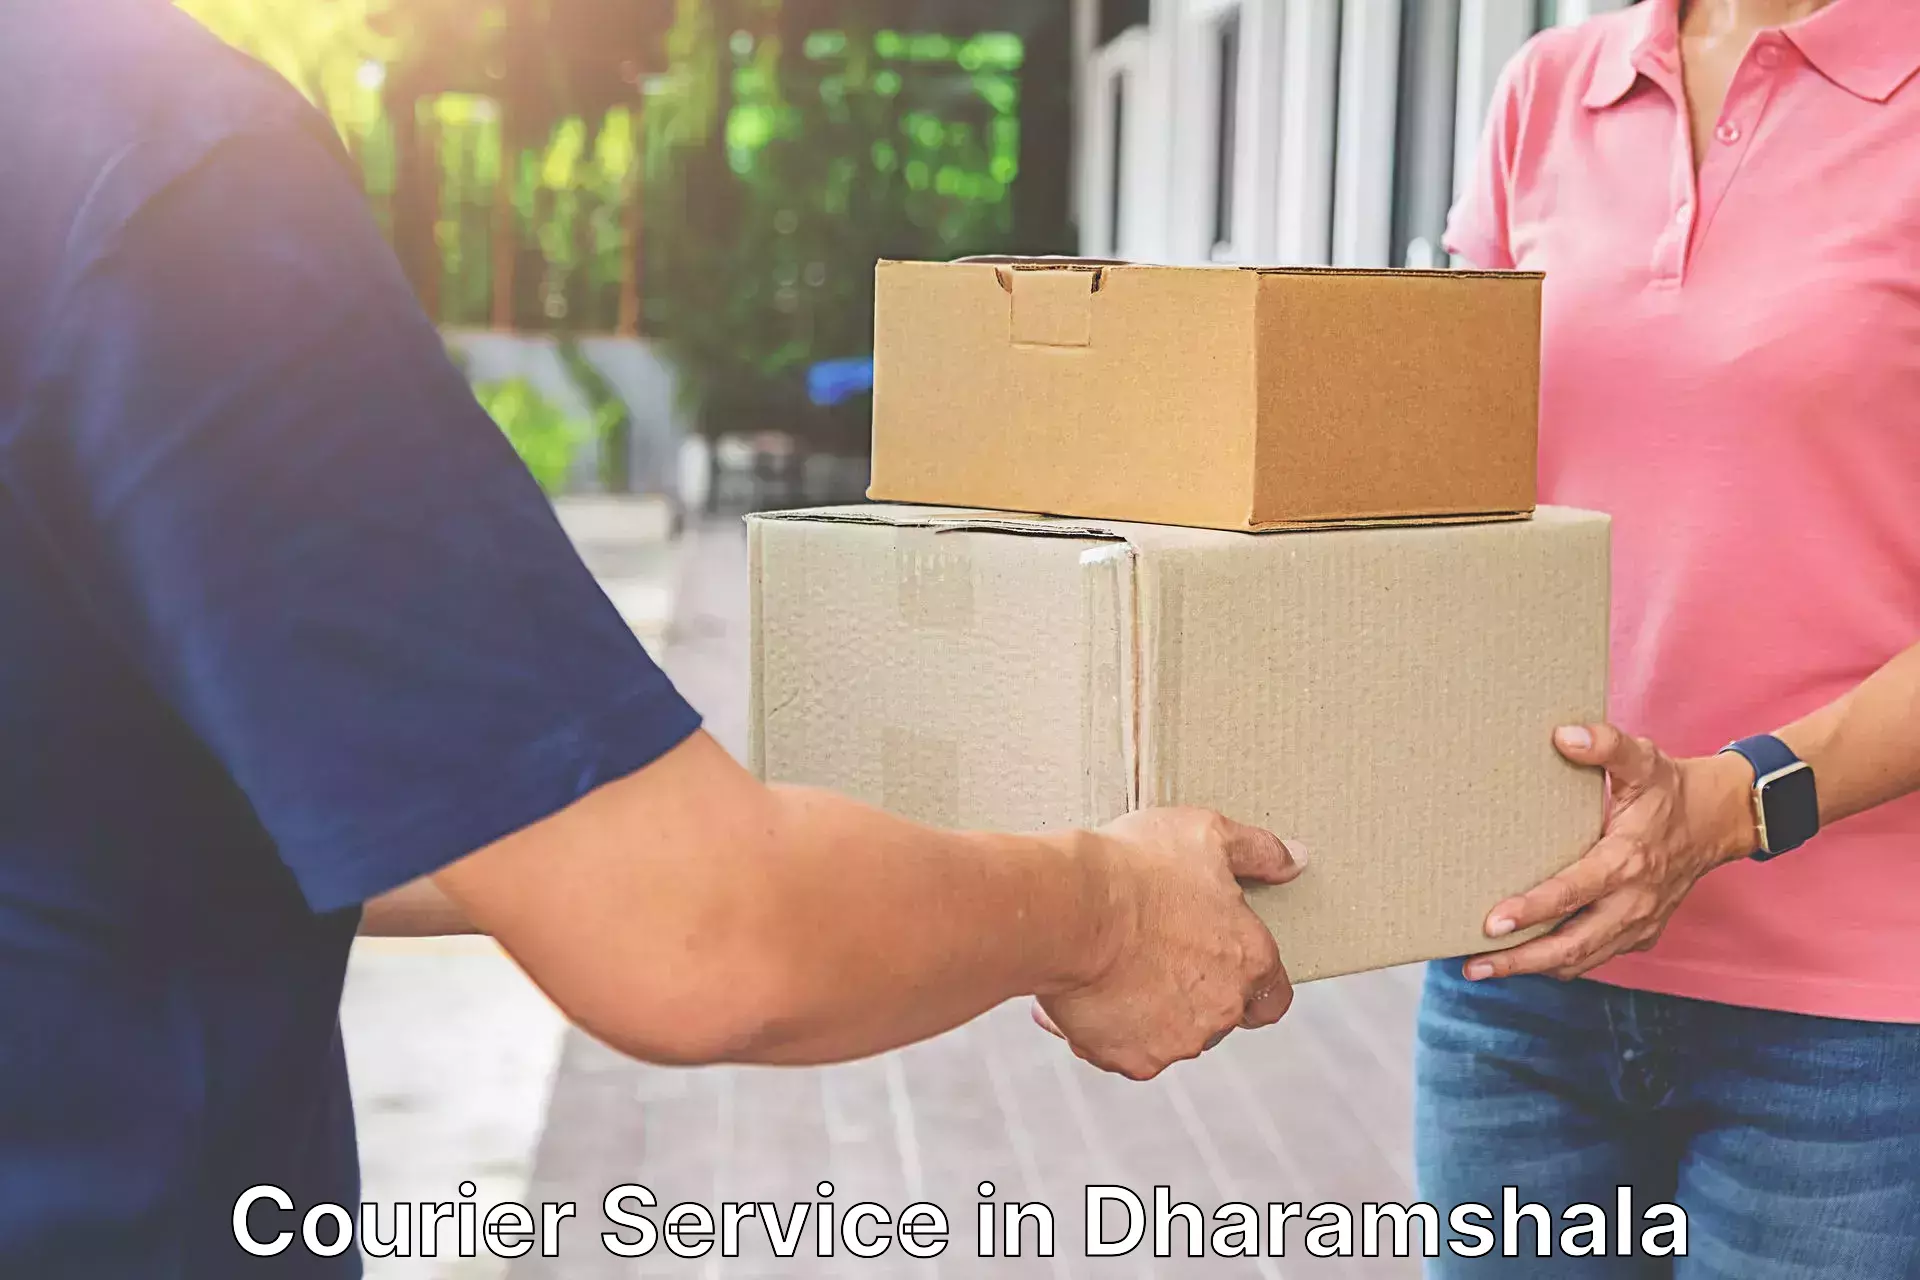 Express mail service in Dharamshala